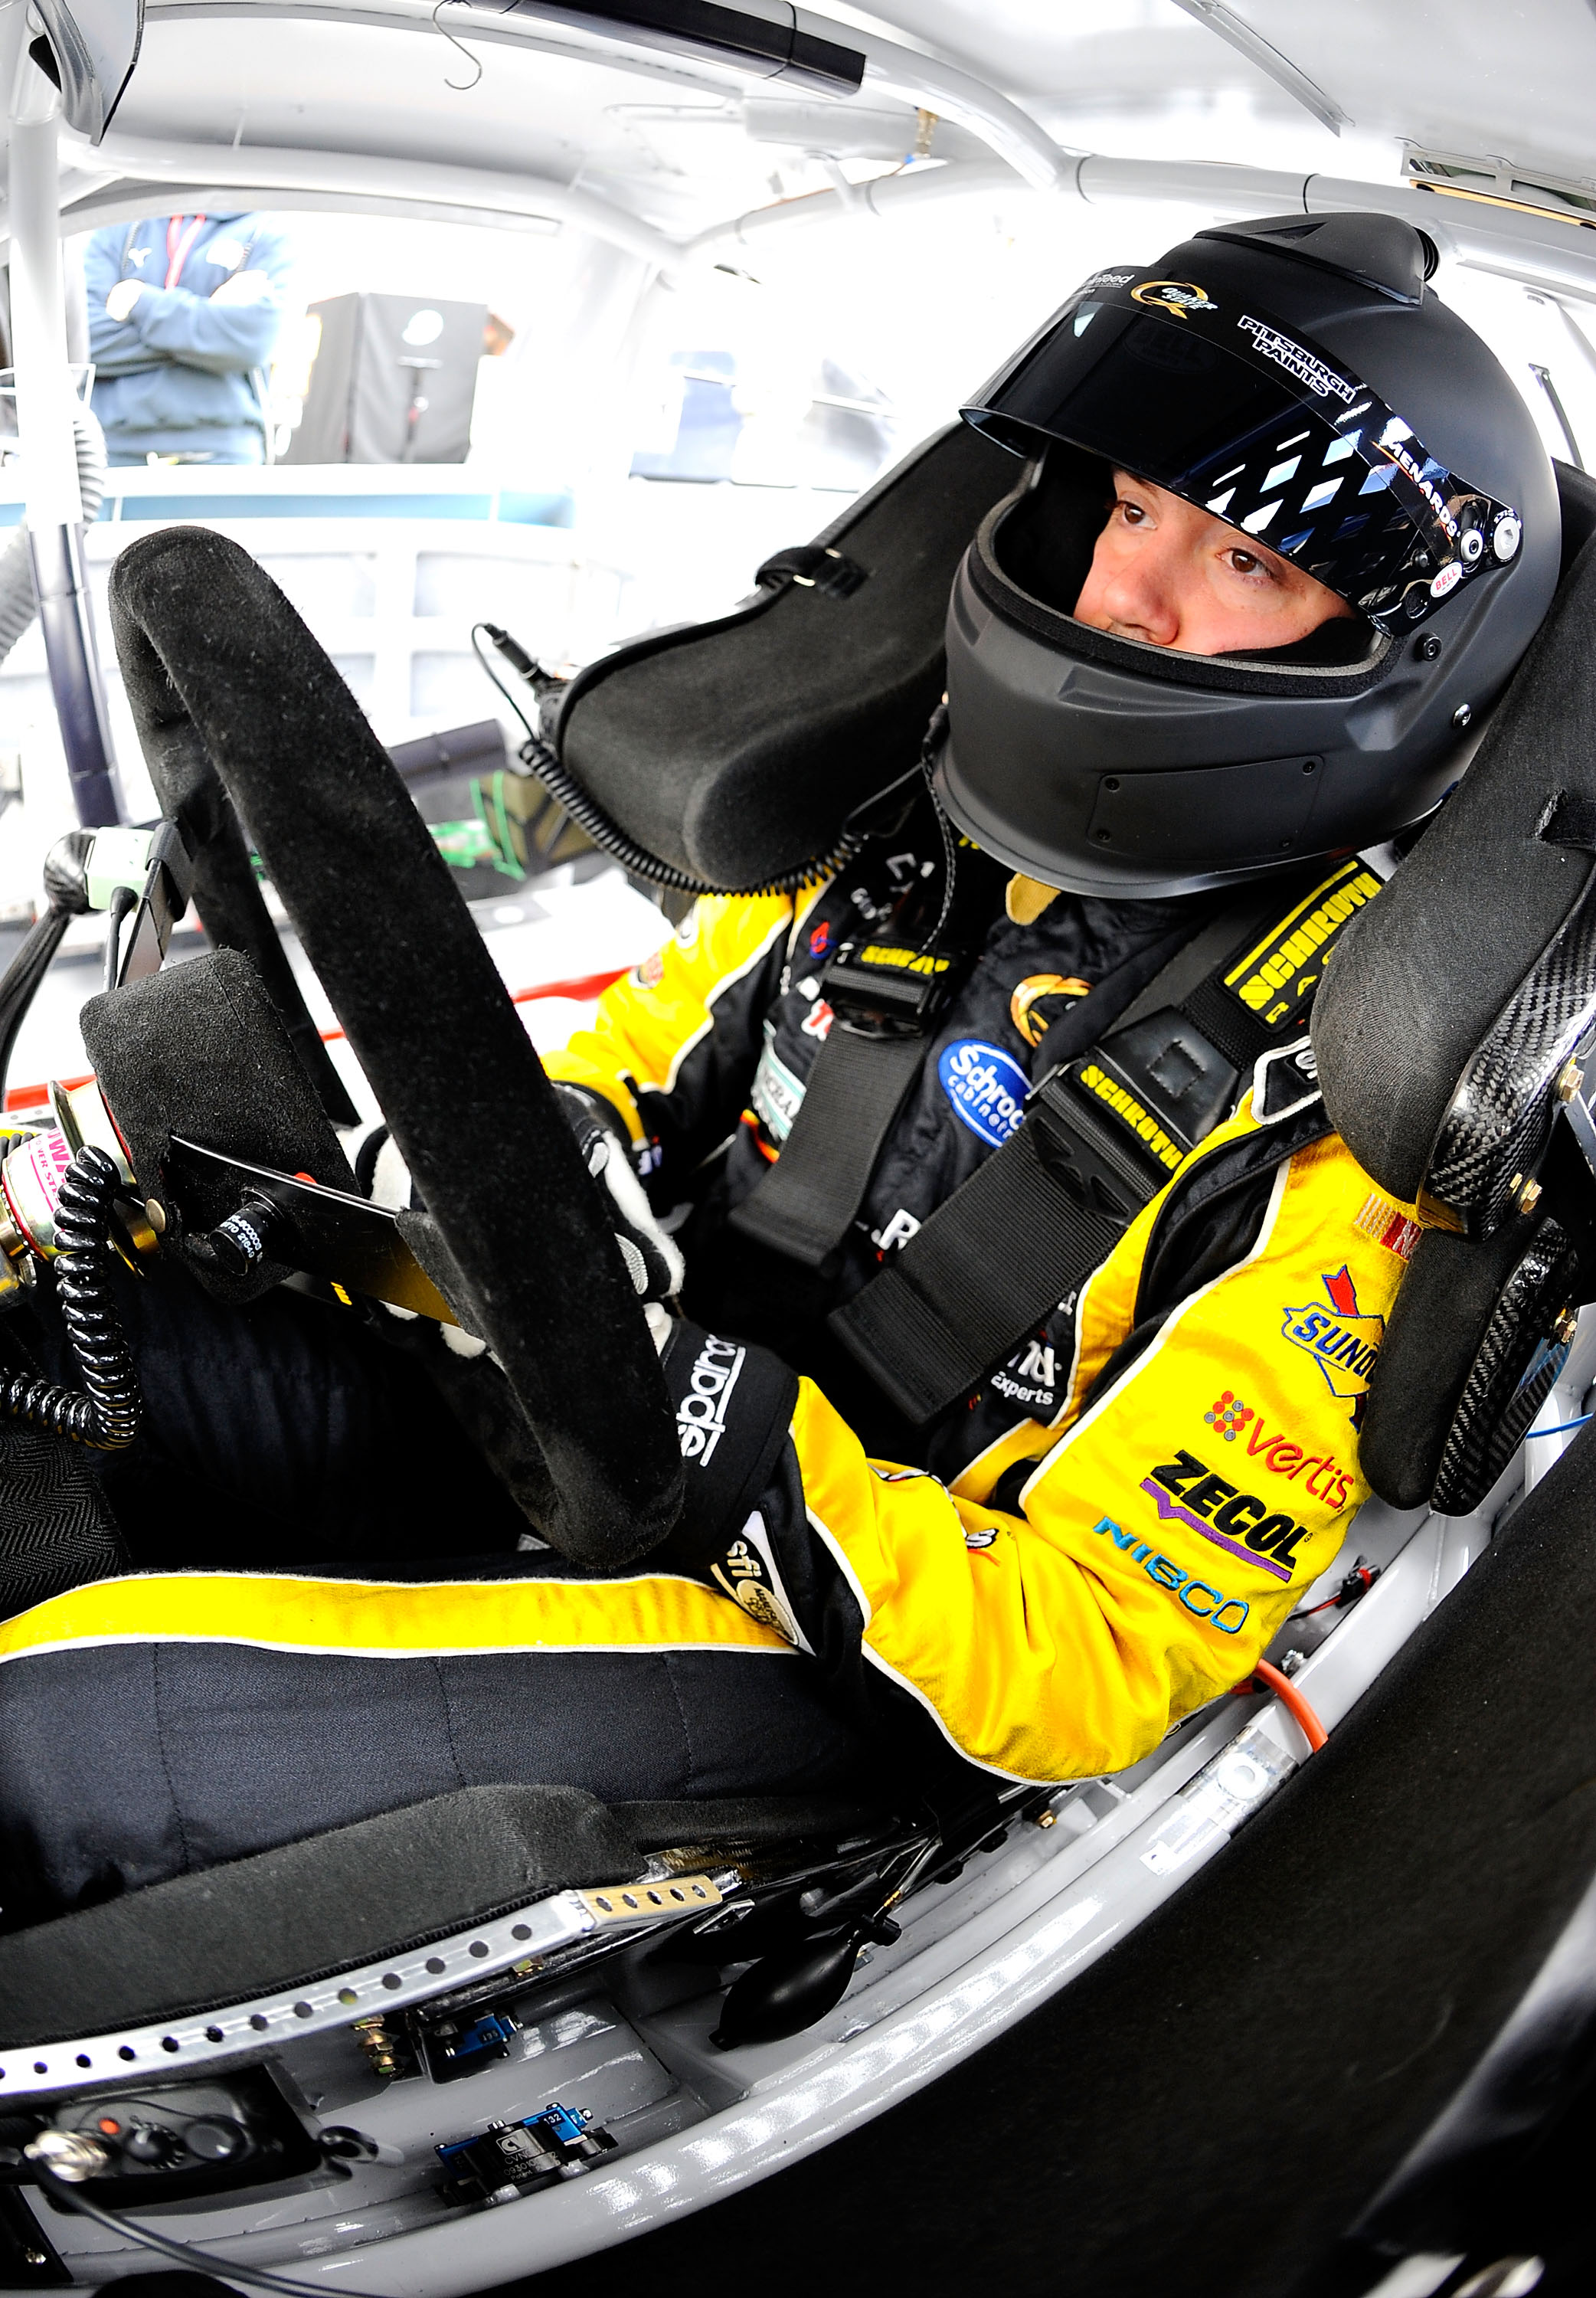 FONTANA, CA - MARCH 25:  Paul Menard, driver of the #27 Serta/Menards Chevrolet, sits in his car during practice for the NASCAR Sprint Cup Series Auto Club 400 at Auto Club Speedway on March 25, 2011 in Fontana, California.  (Photo by Jared C. Tilton/Gett